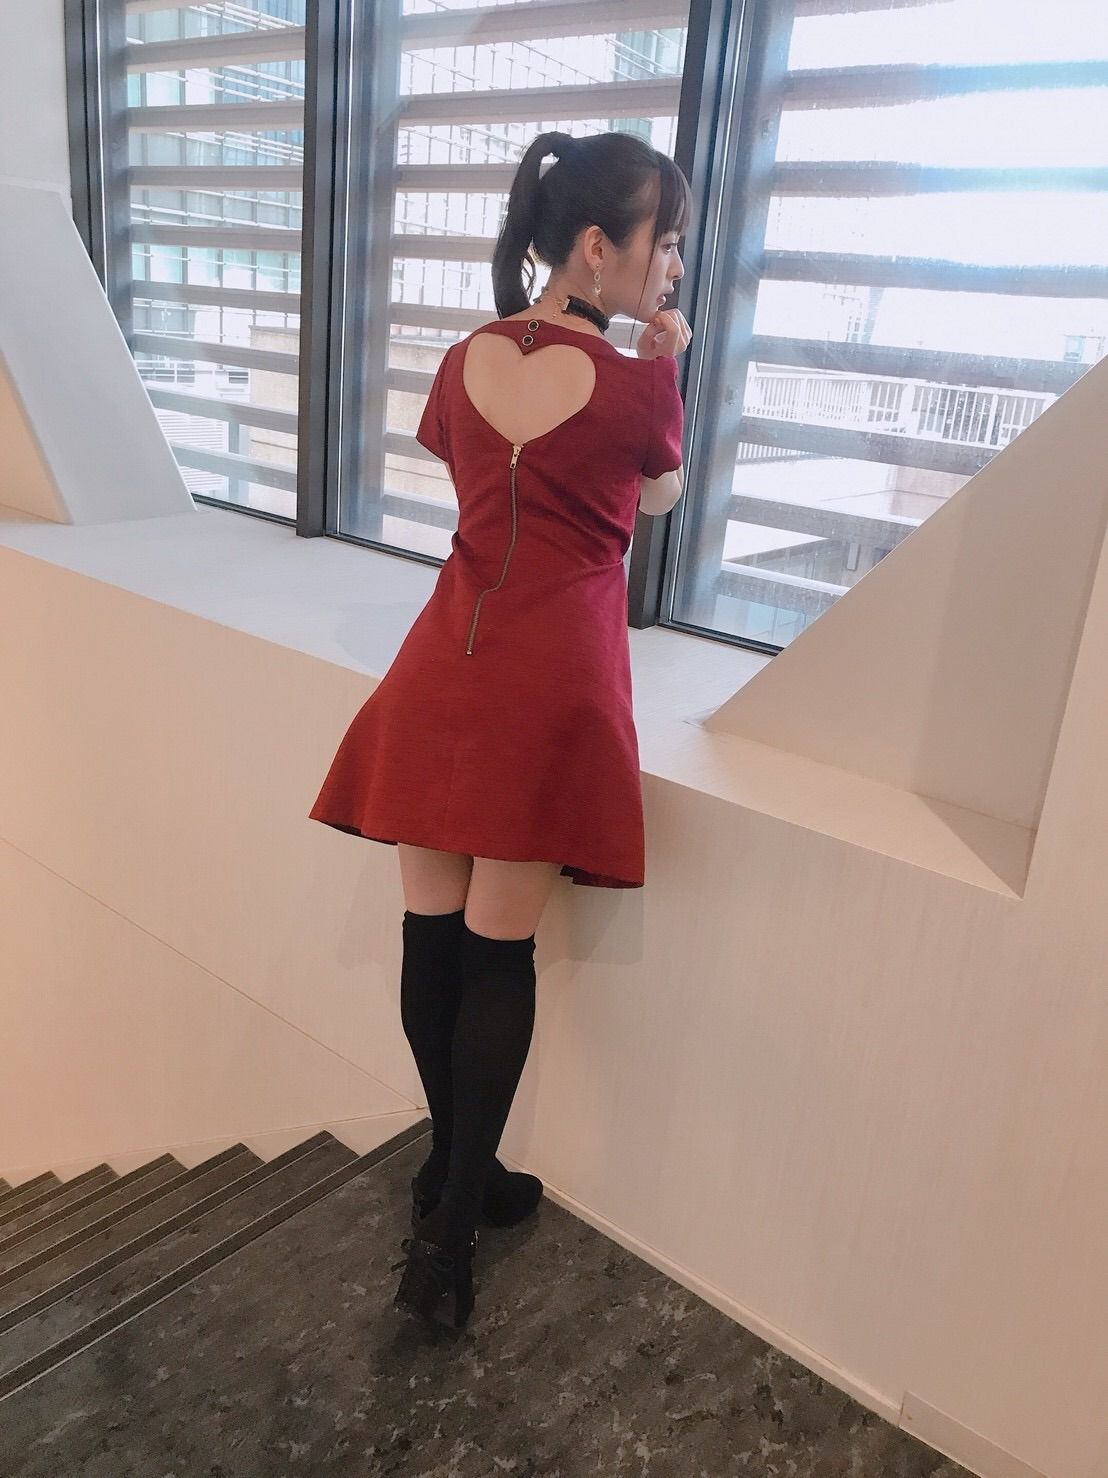 Sumire Uesaka "to emphasize the thigh... W] also erotic image offer Wwwwwww 3